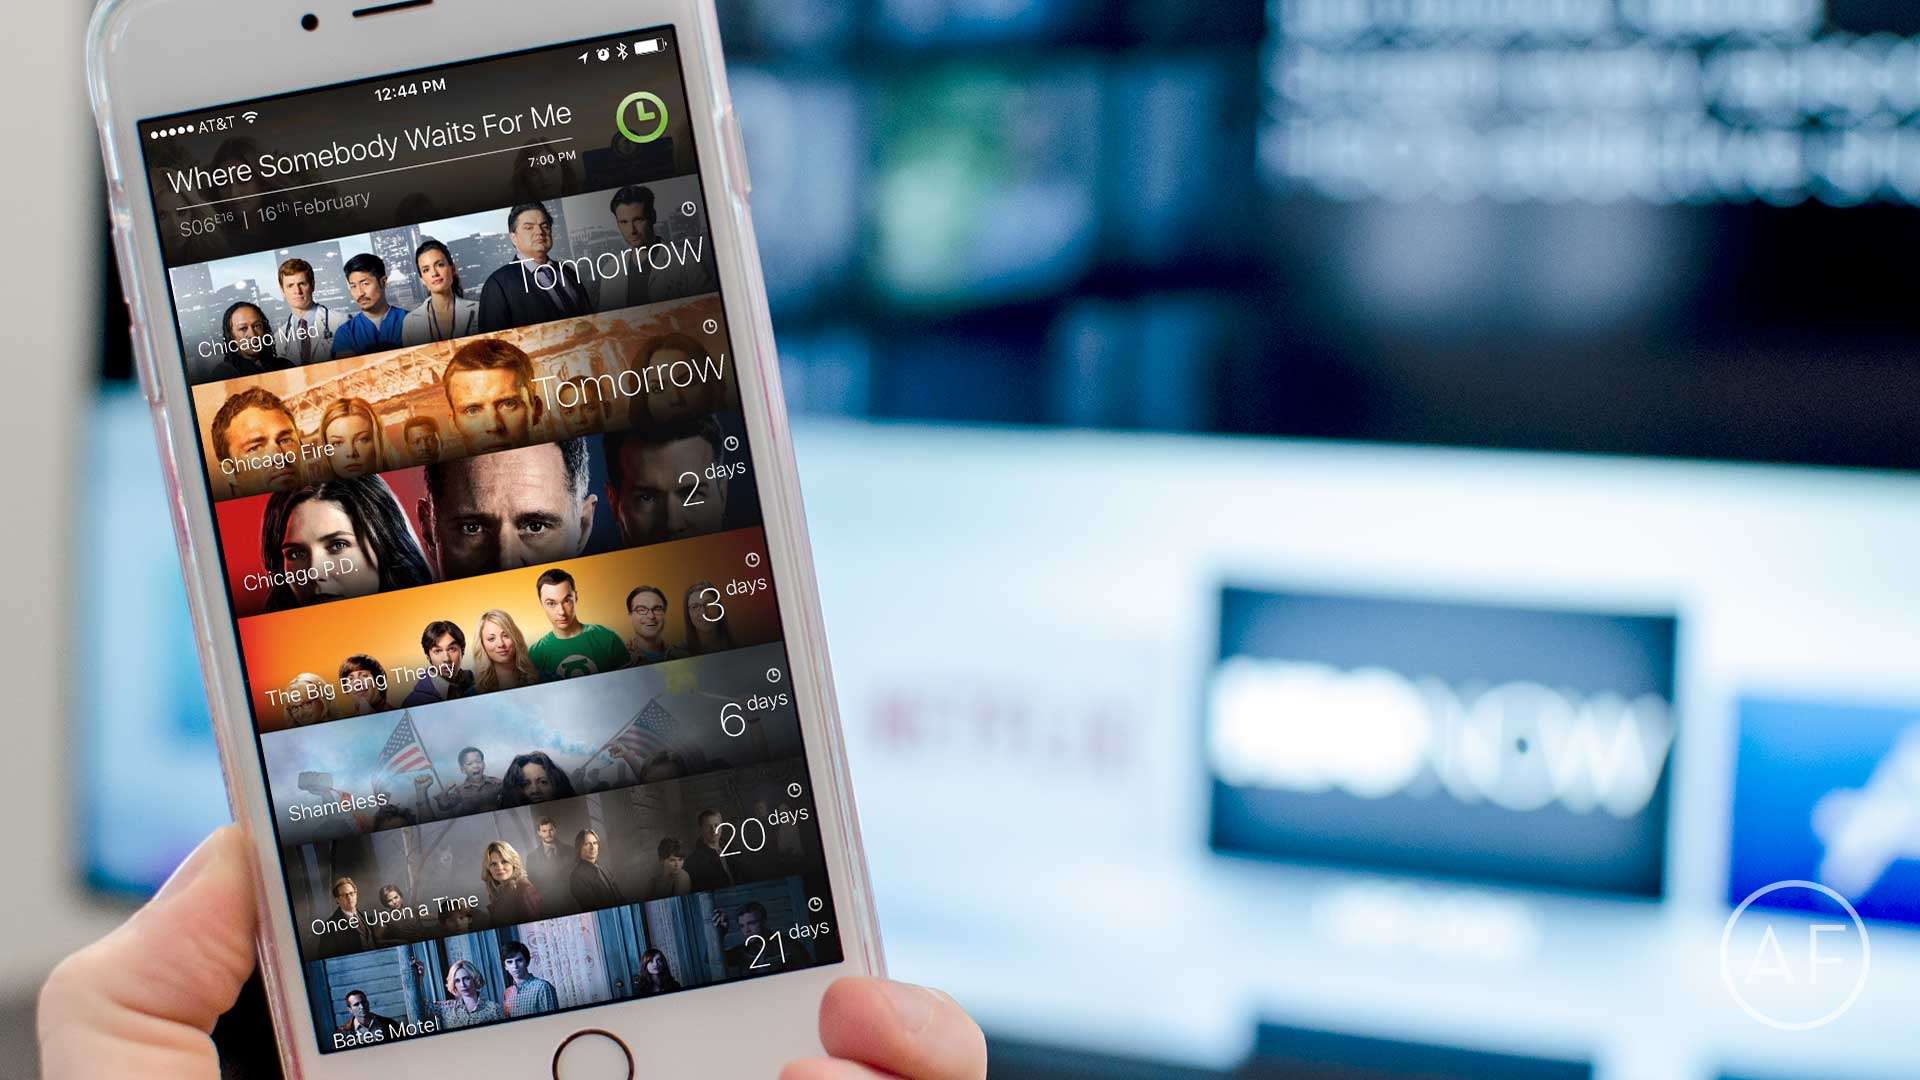 If you want to keep up on your favorite shows and movies, these are the best apps to do it.